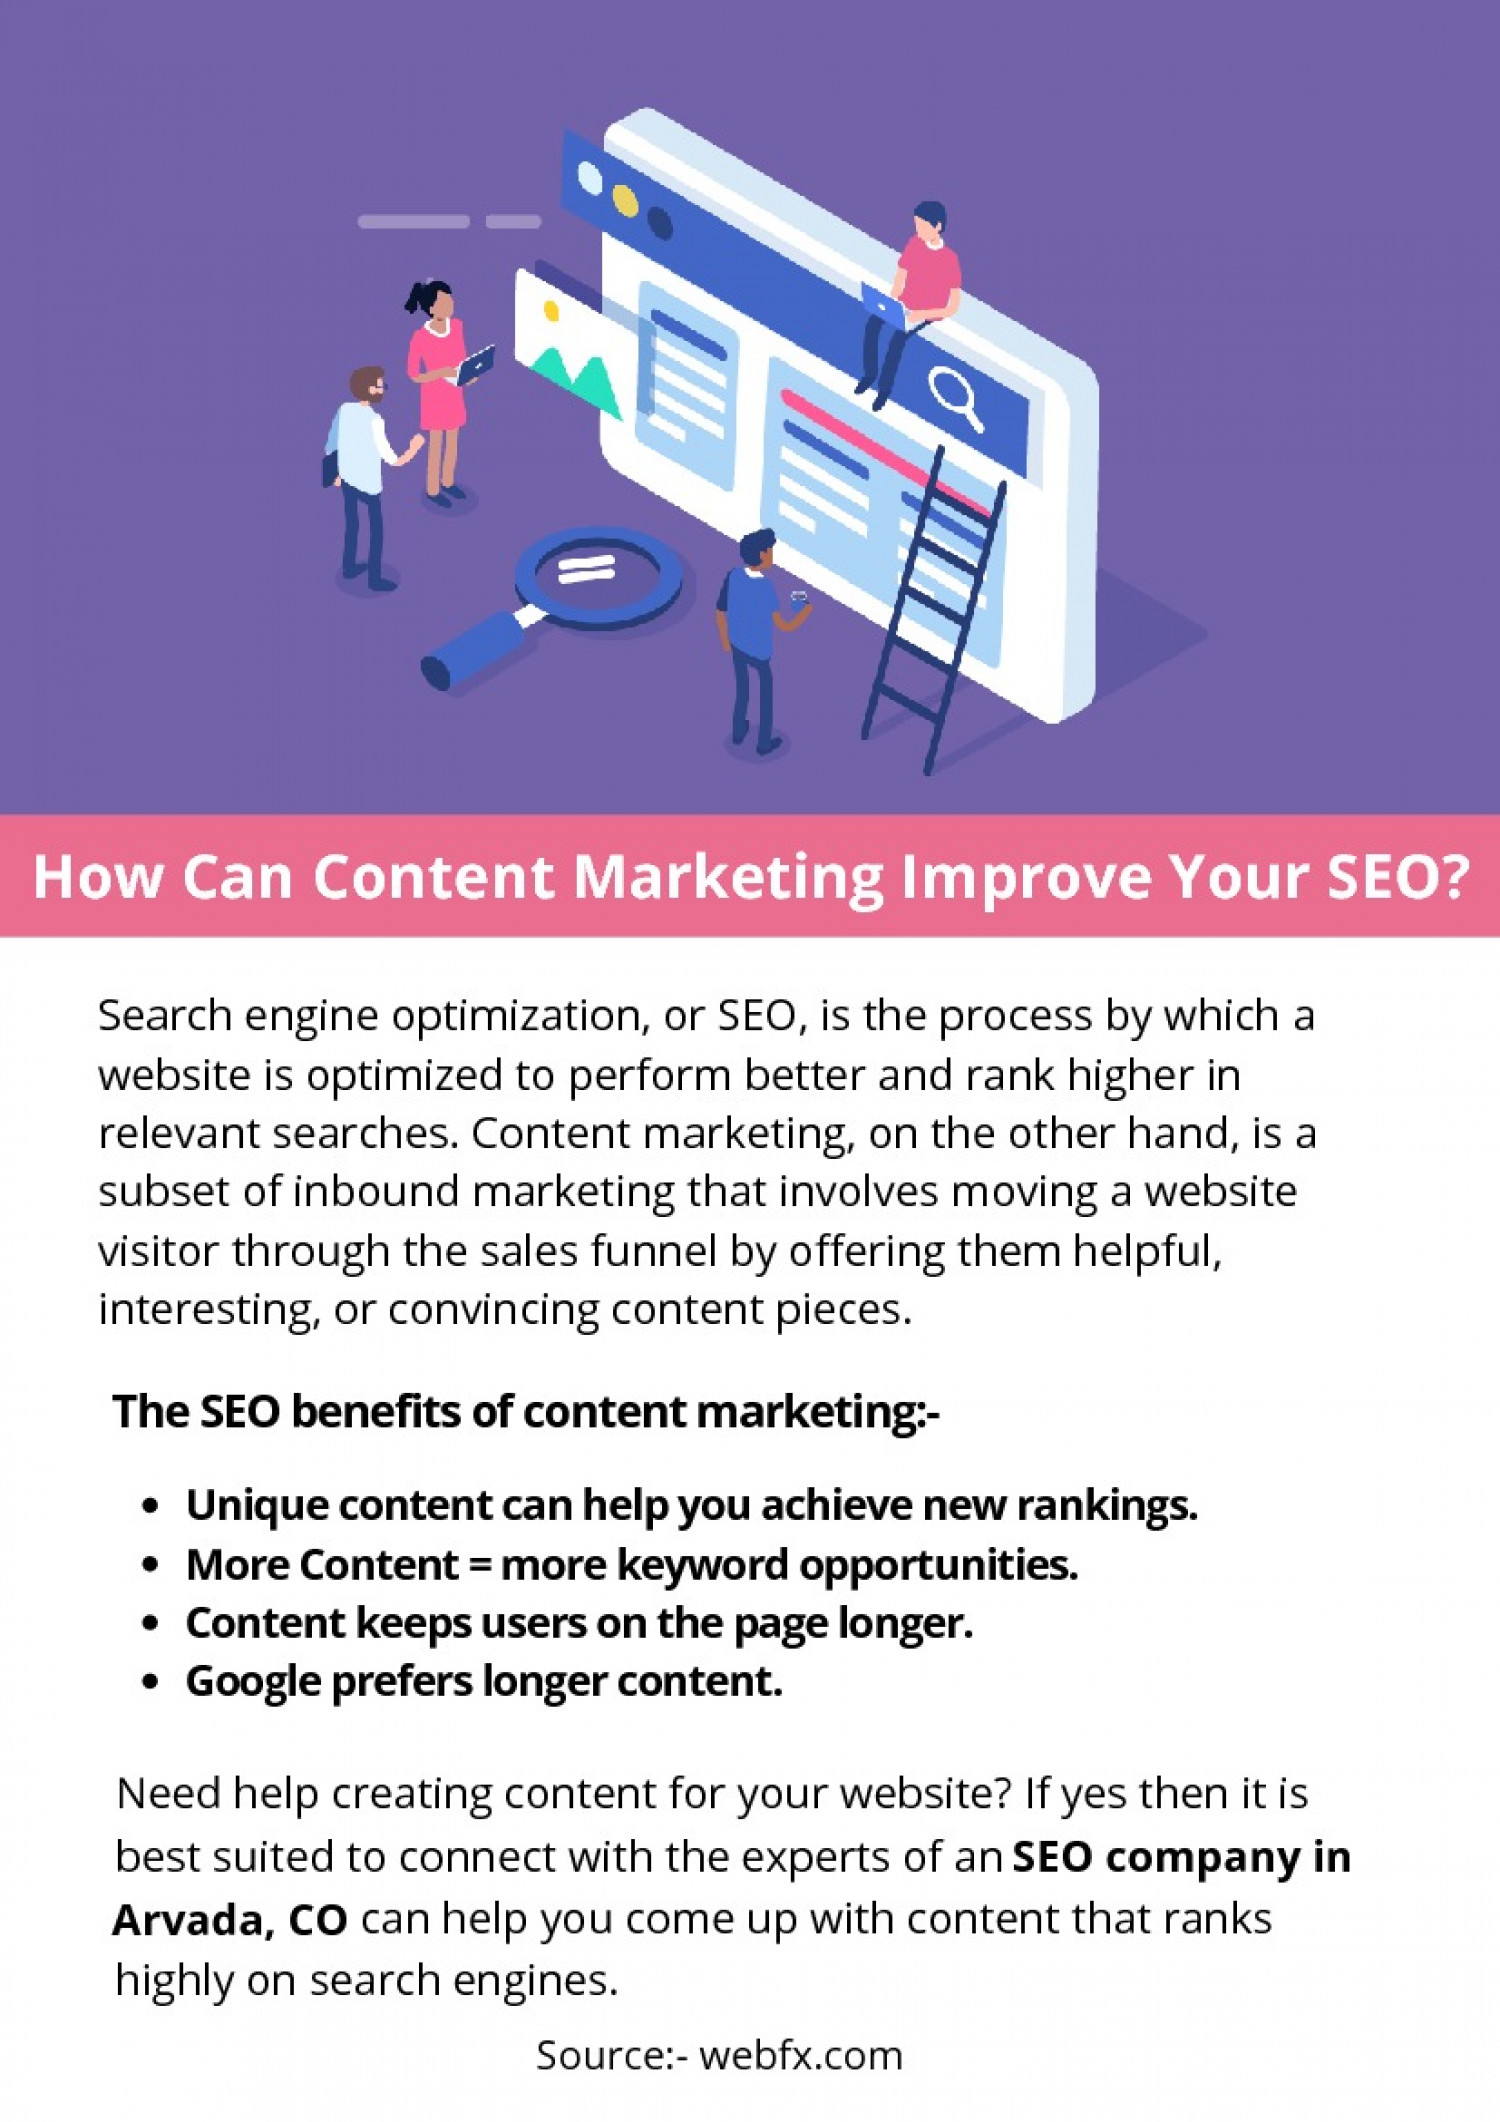 How Can Content Marketing Improve Your SEO? Infographic